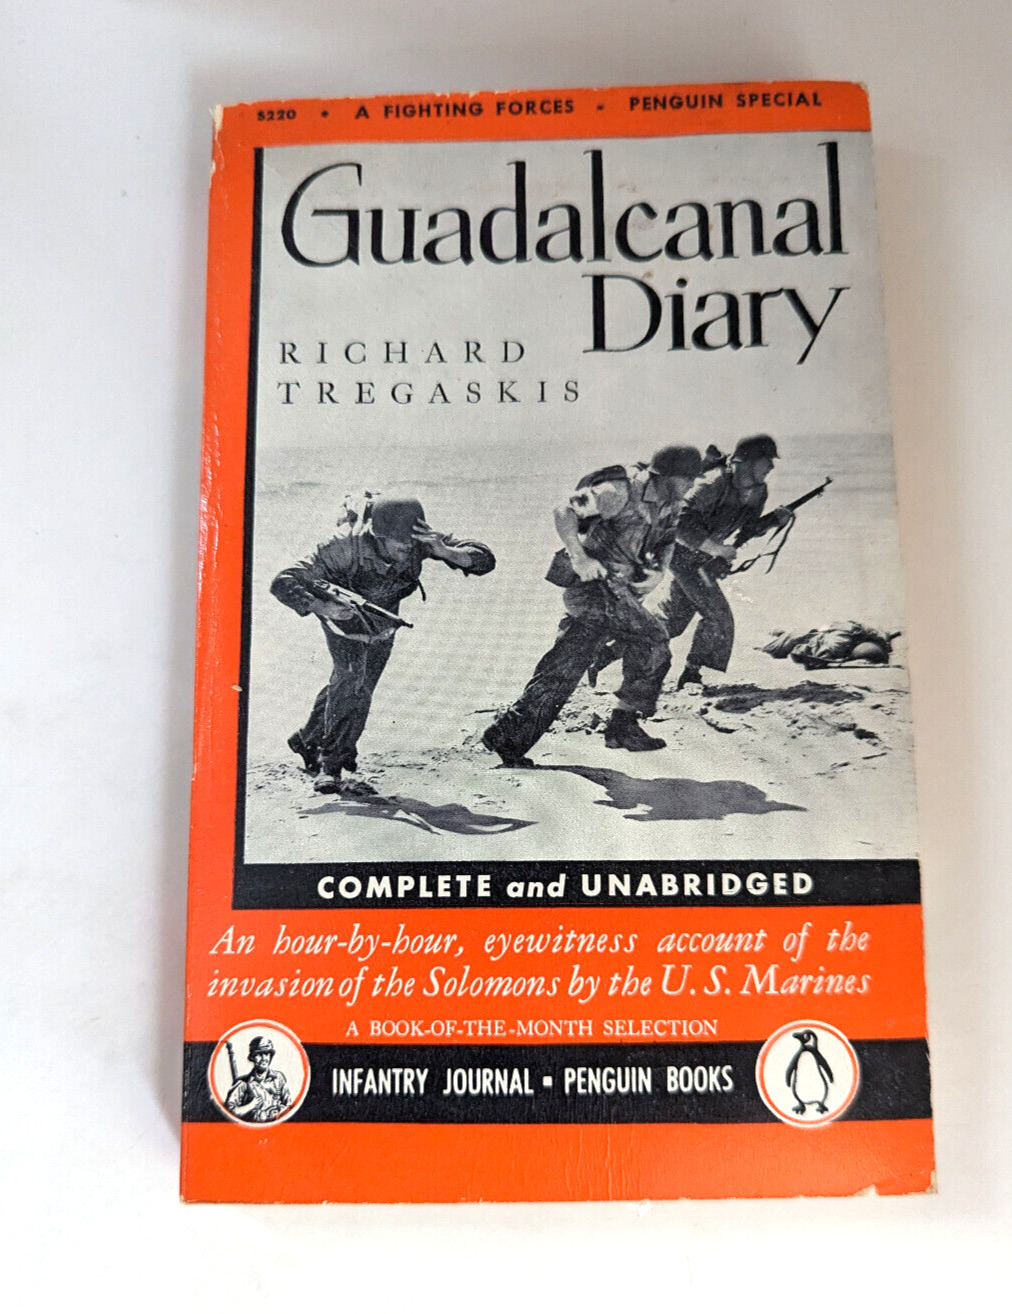 T21-Guadalcanal Diary Richard Tregakis Complete and unabridged 1943 Penguin Book